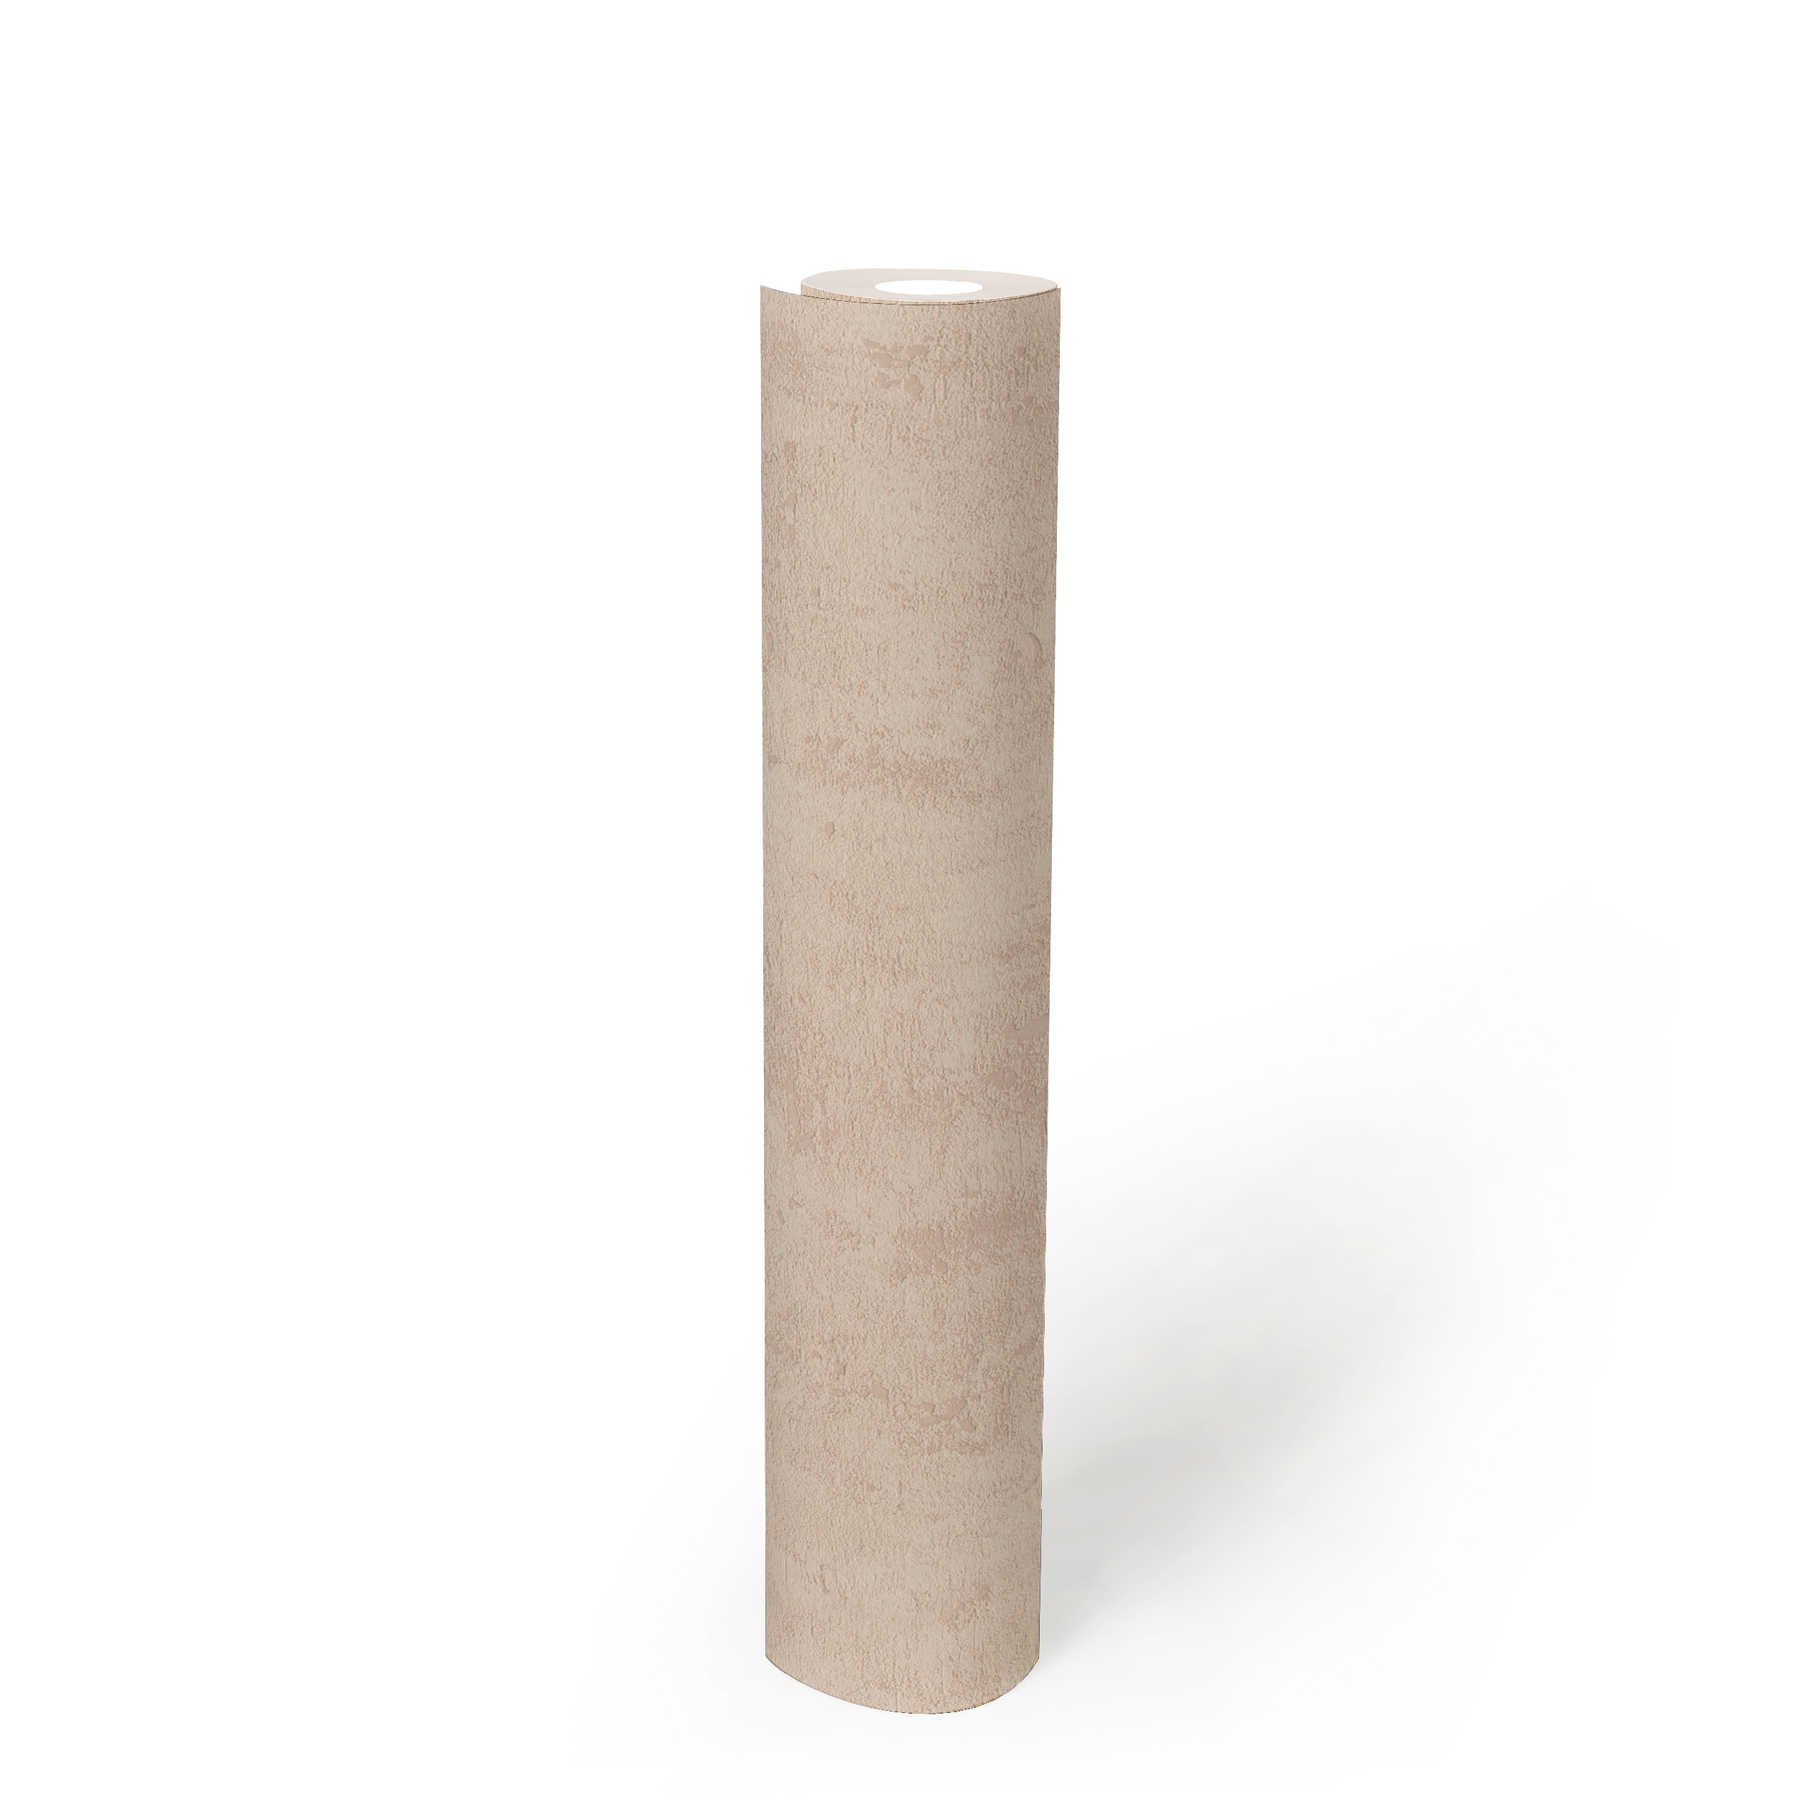             Plaster optics wallpaper non-woven in sand-beige with texture effect
        